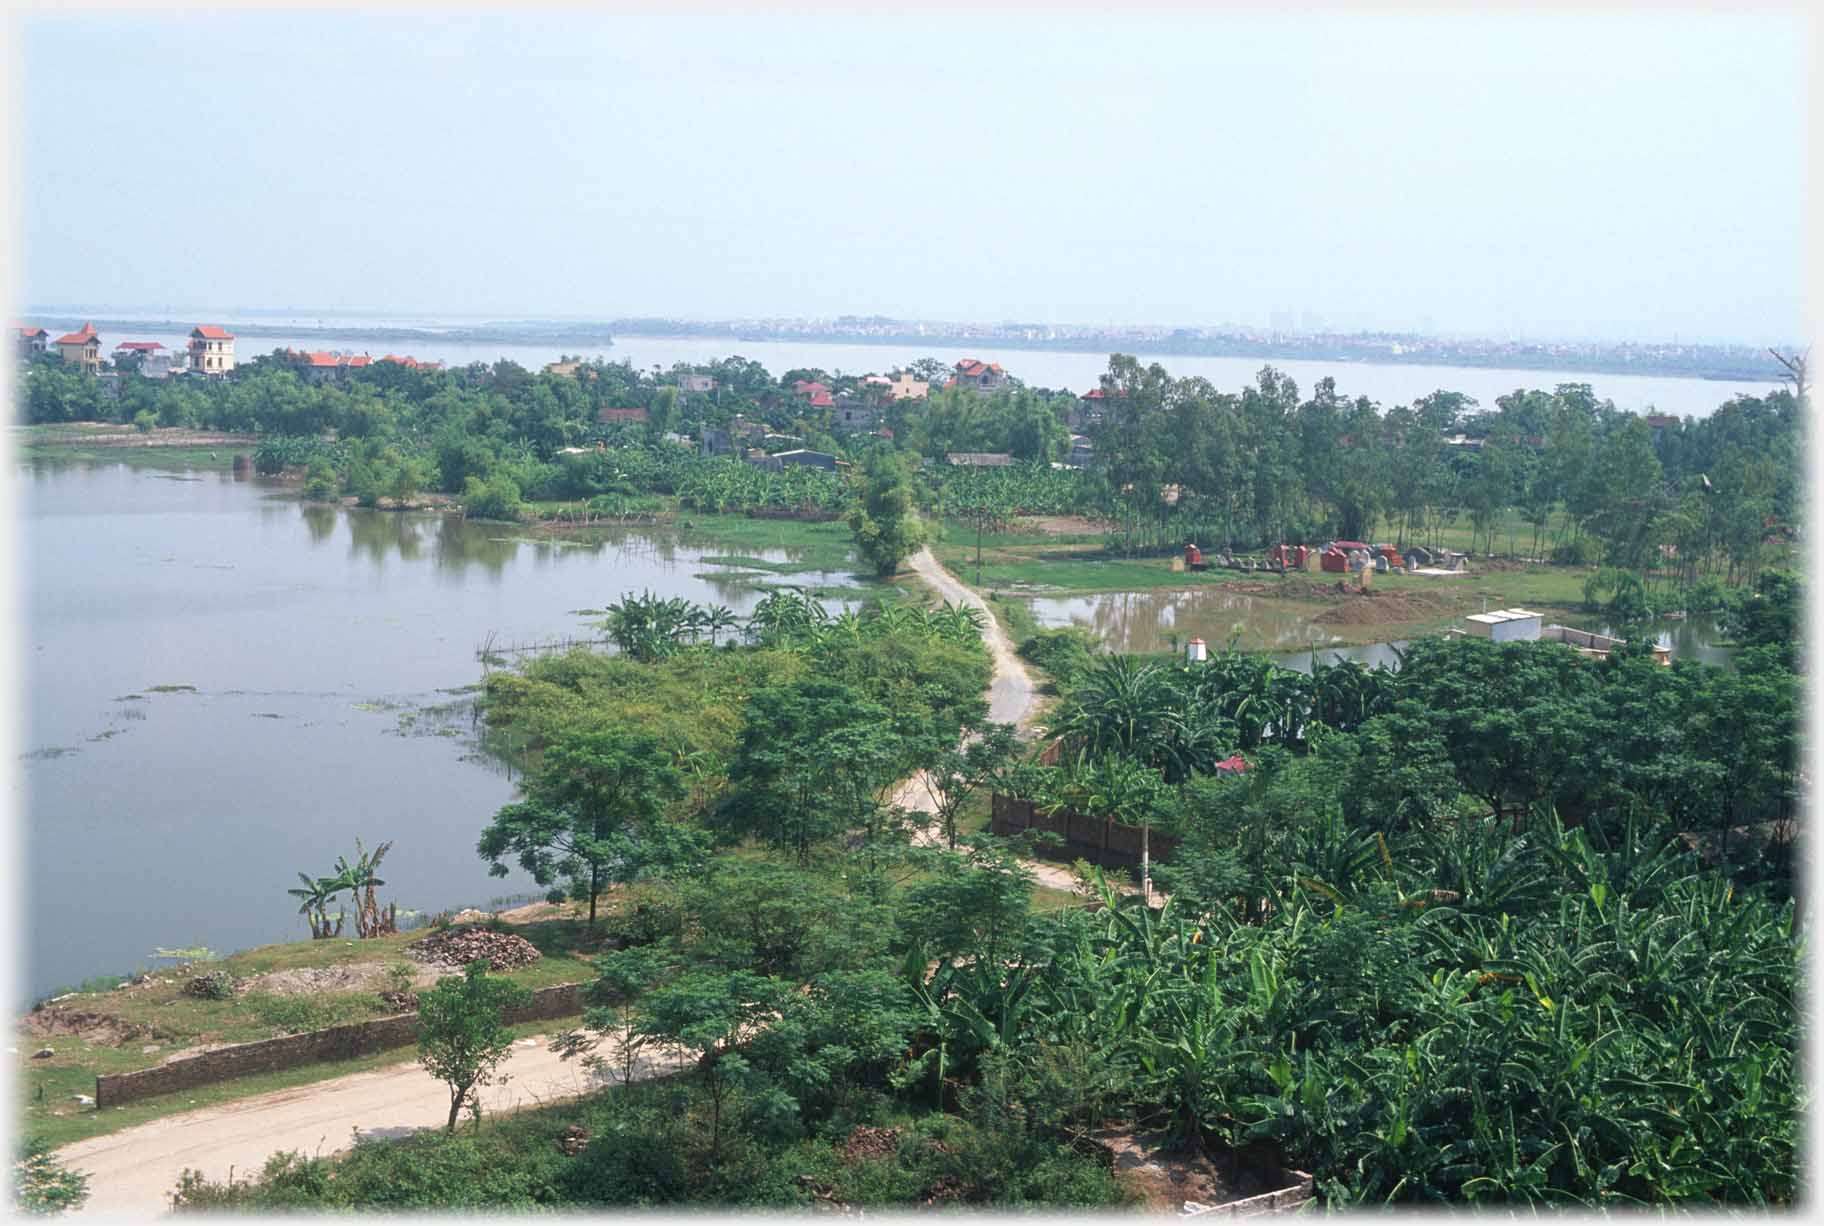 Wooded area with lagoons, road and river beyond.